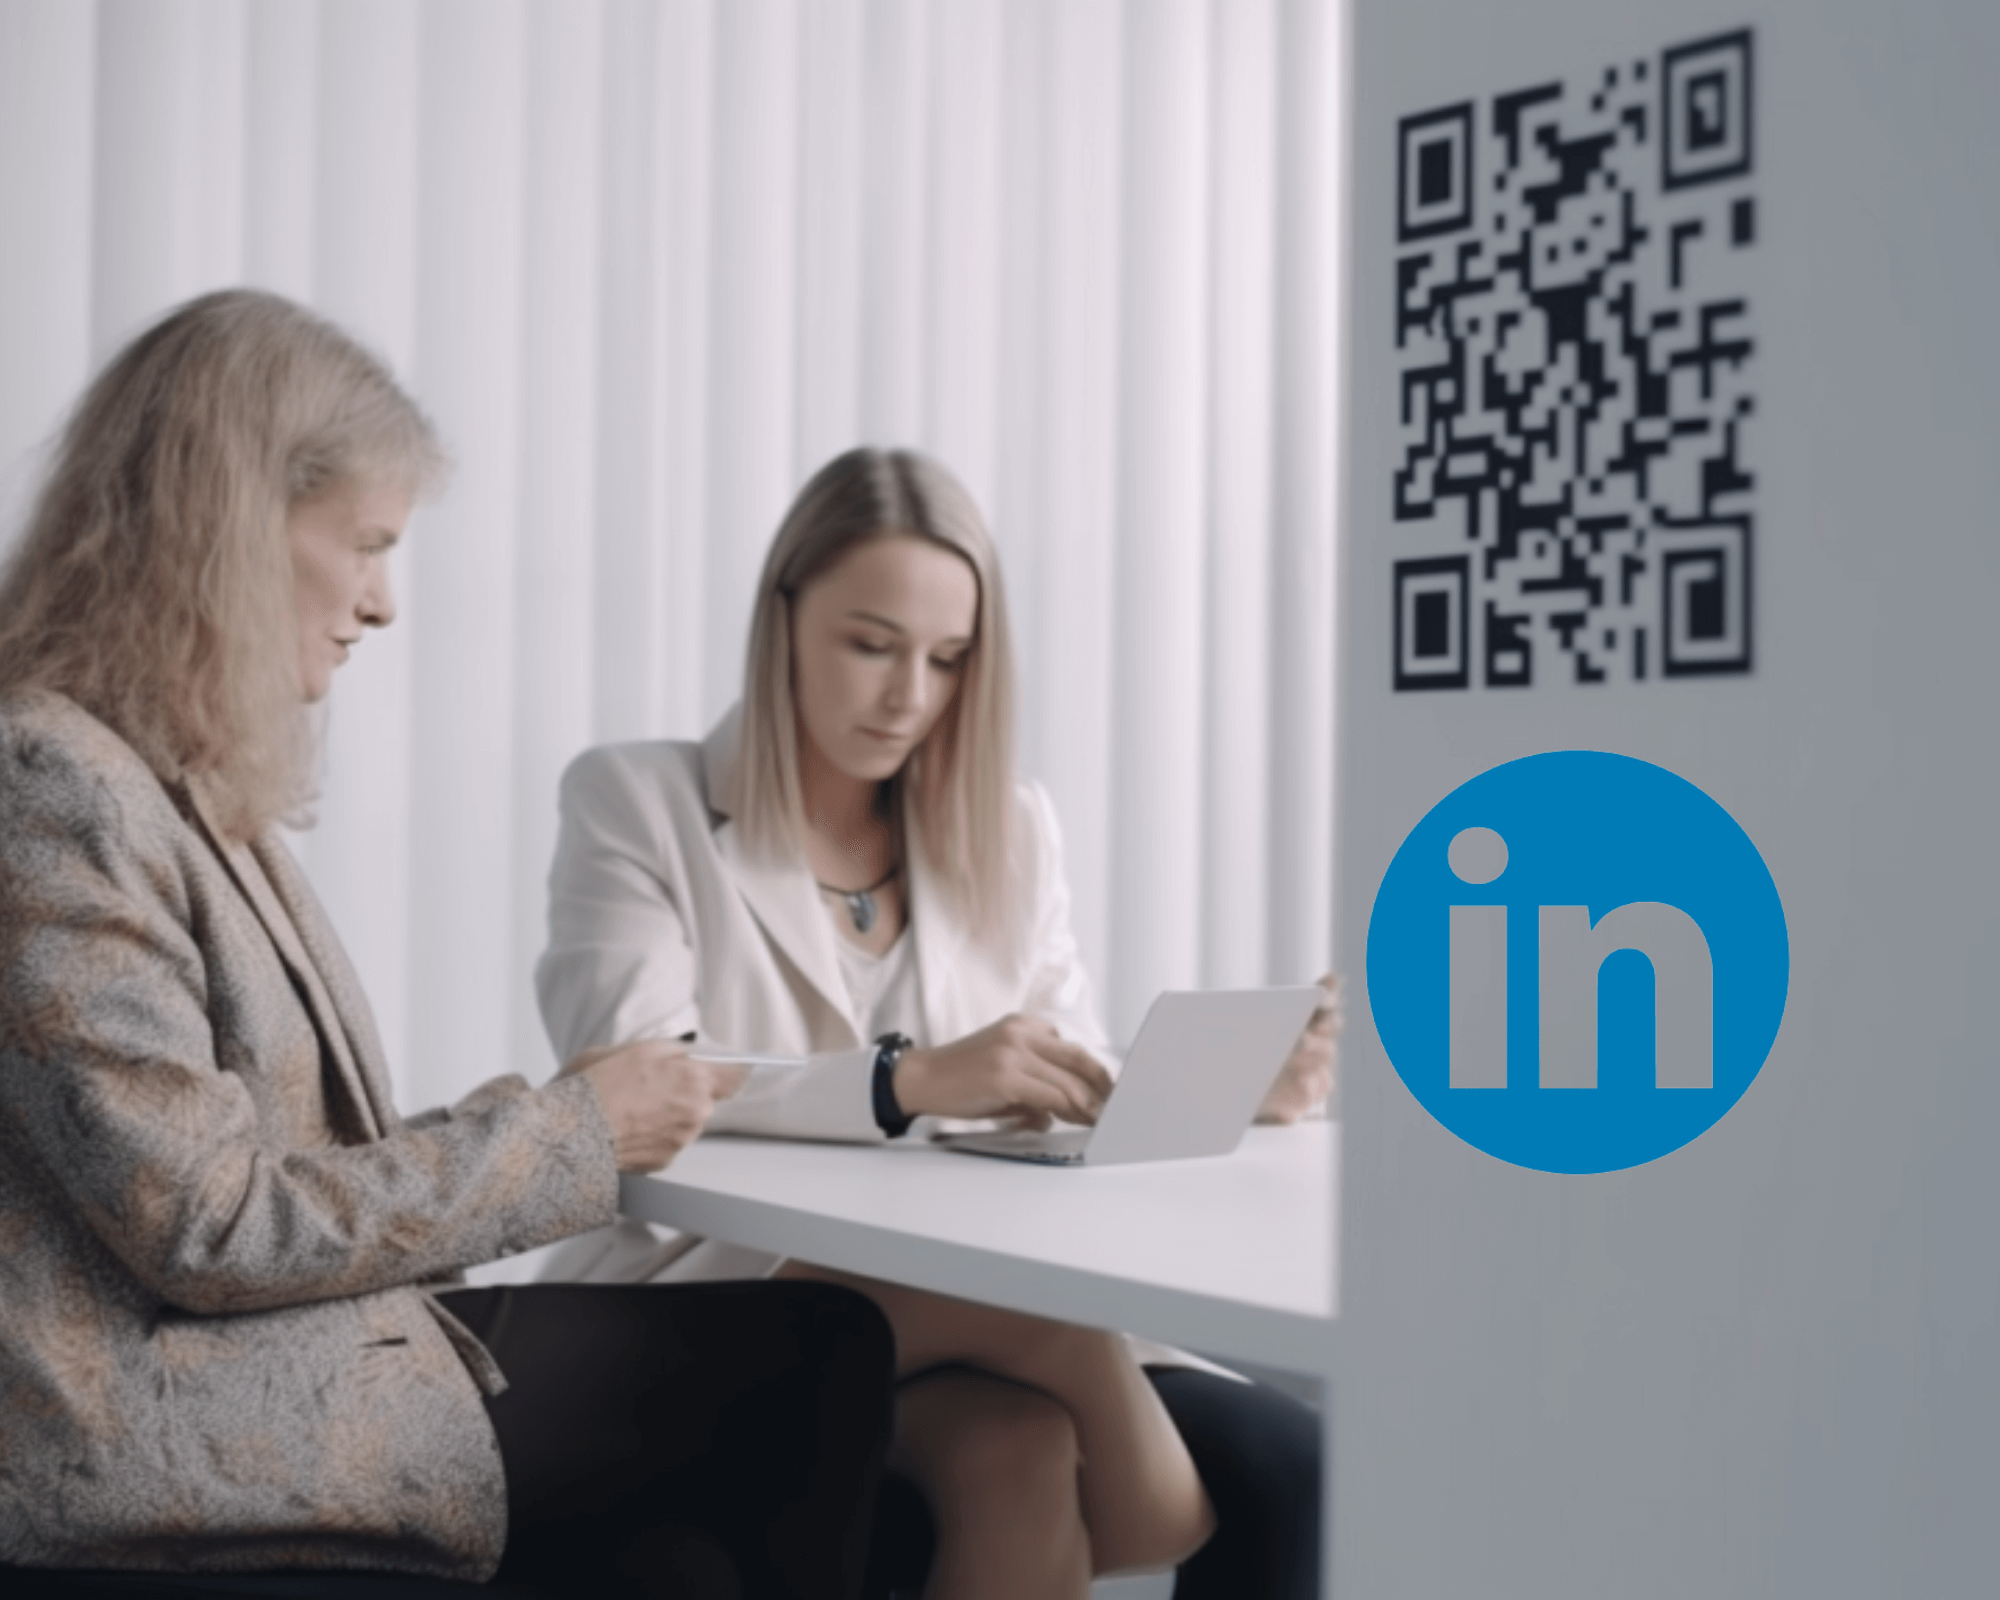 The role of the LinkedIn QR code in business networking